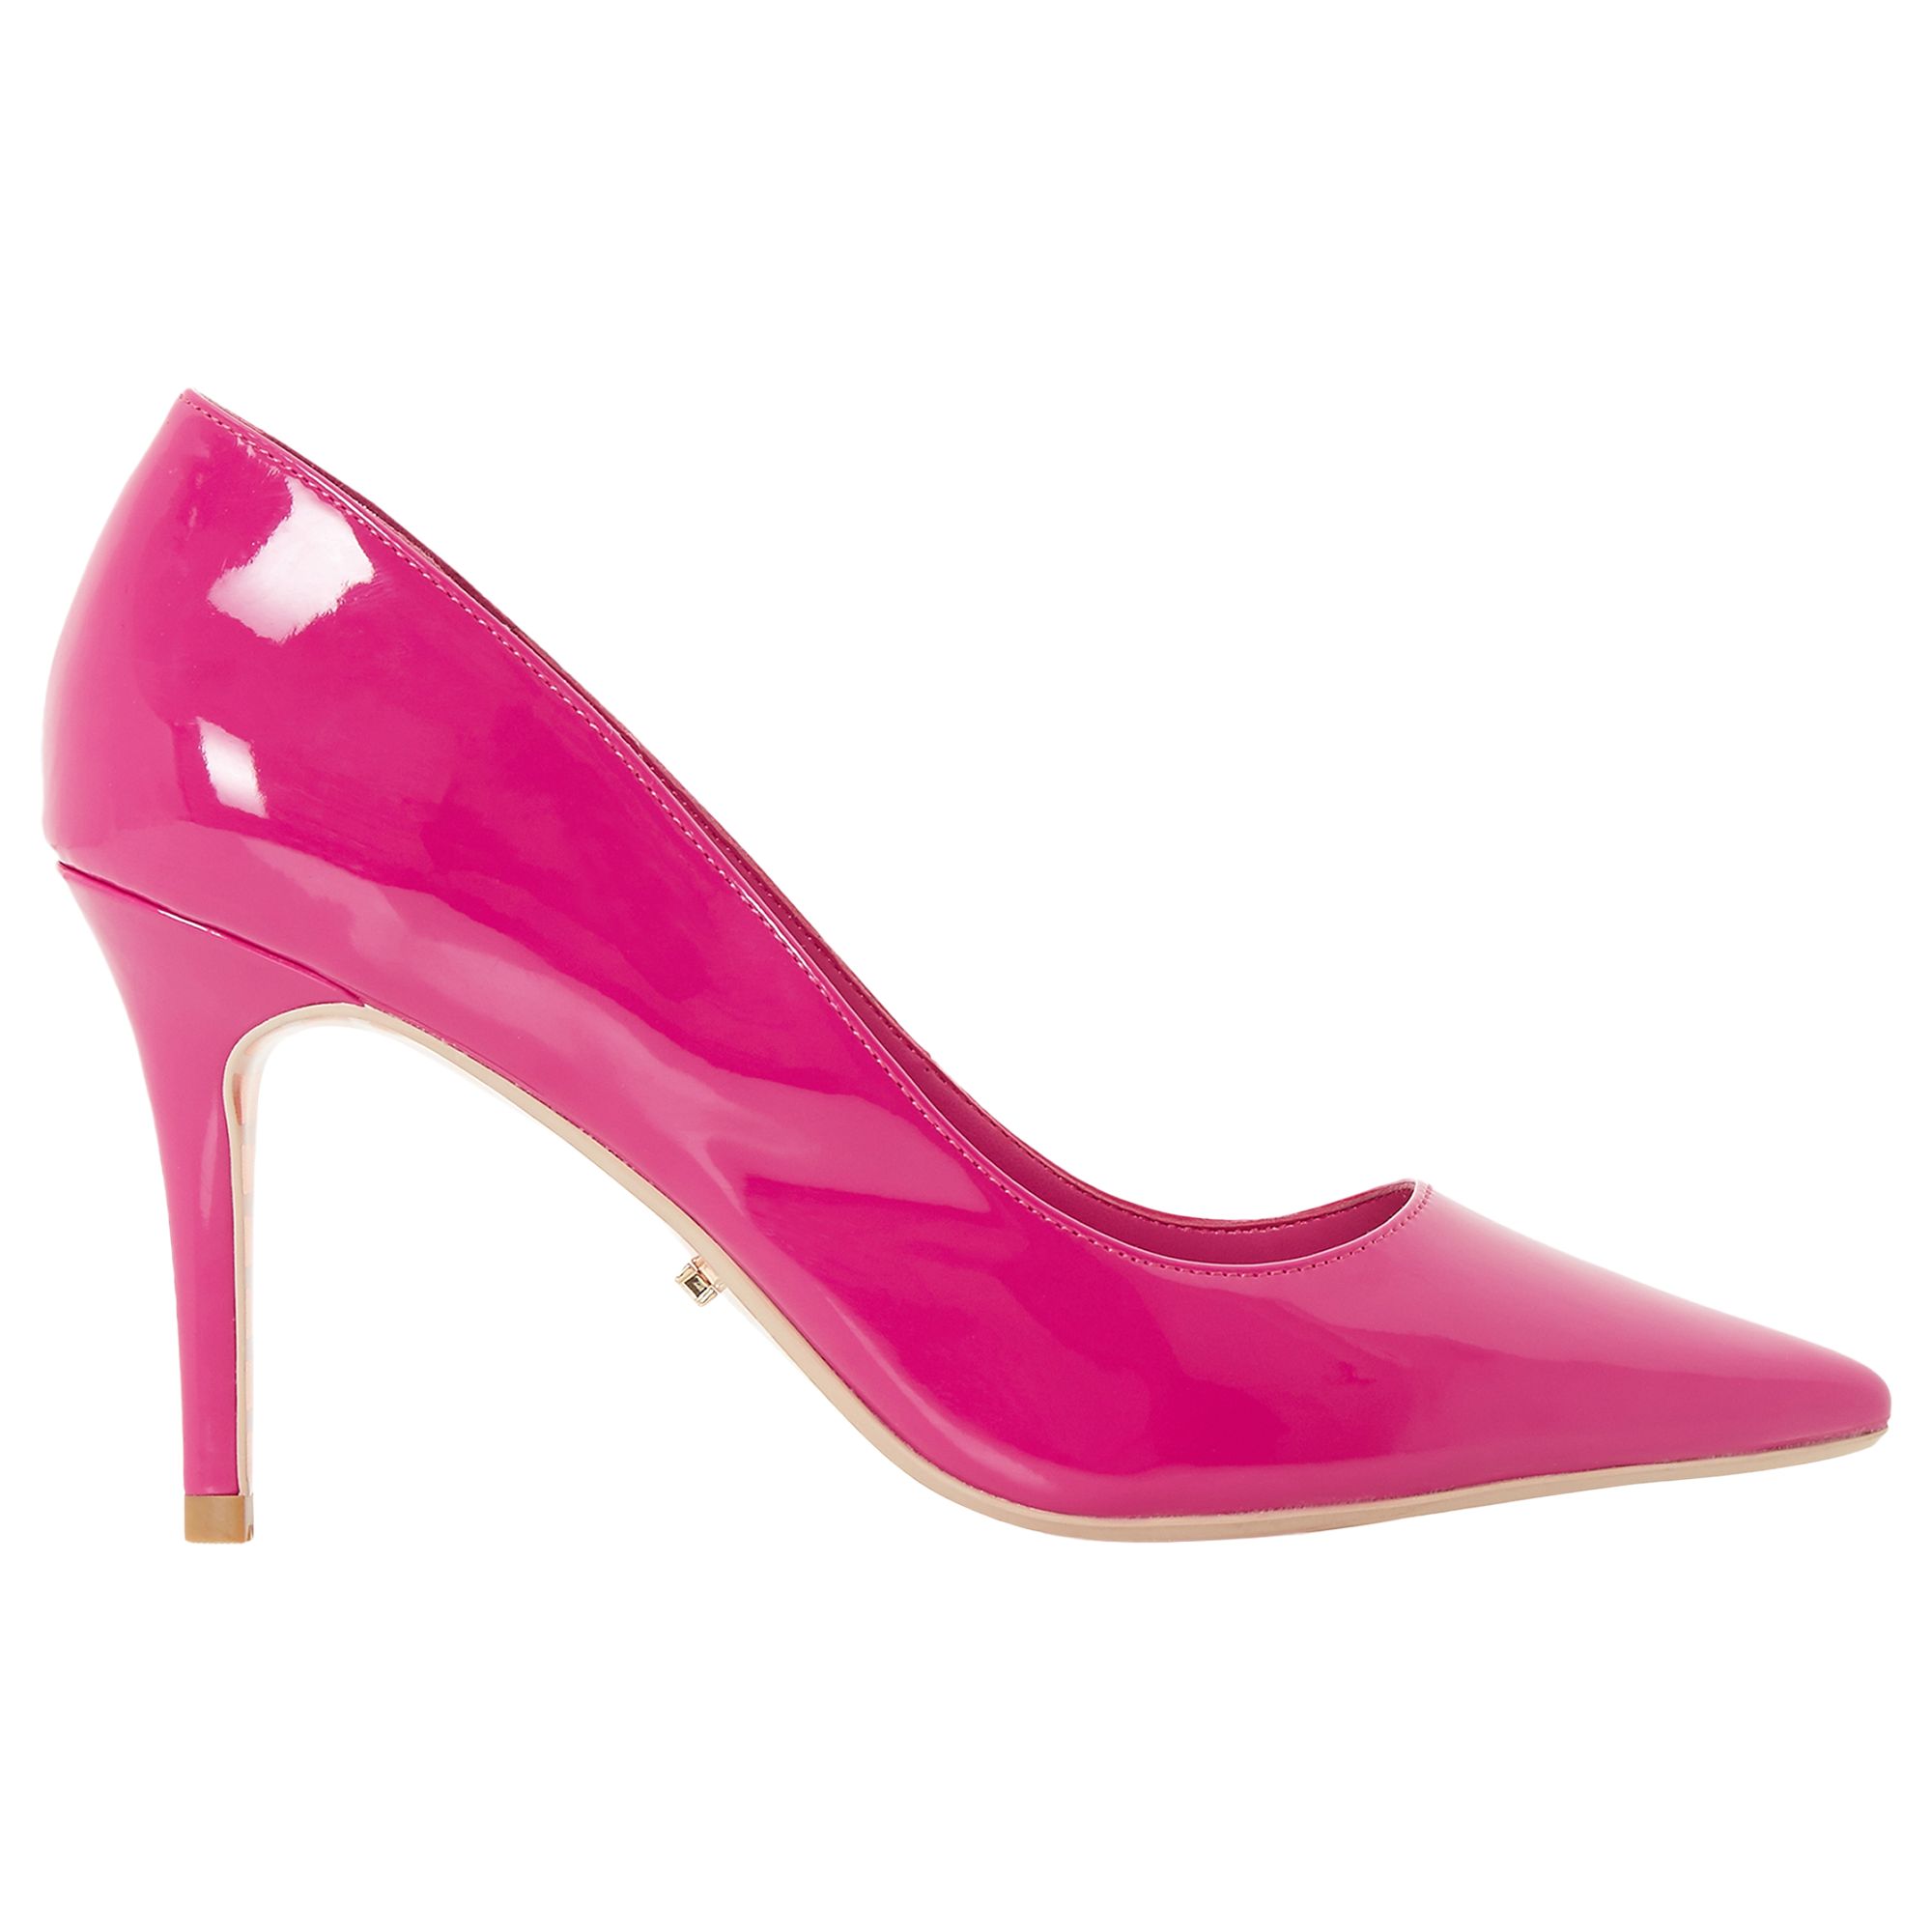 Dune Aurrora Pointed Toe Court Shoes, Pink, 7